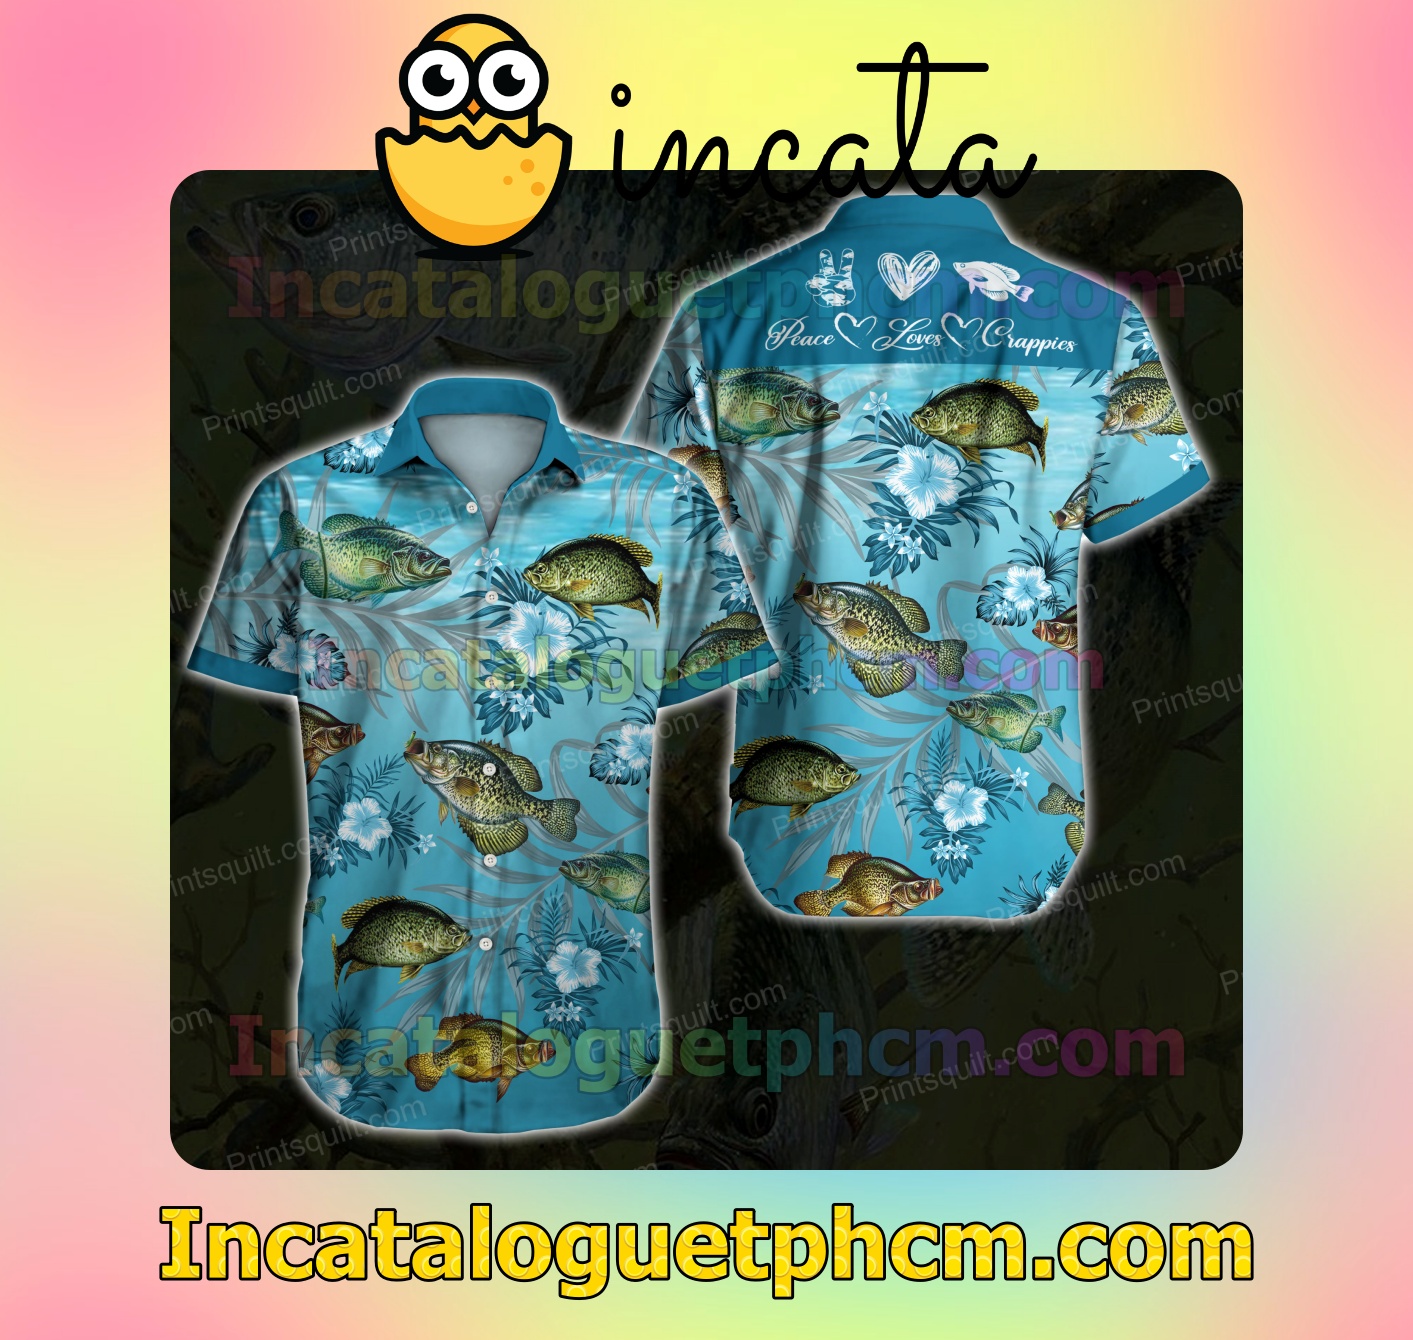 Crappie Lovers Peace Loves Crappies Tropical Floral Blue Mens Short Sleeve Shirts